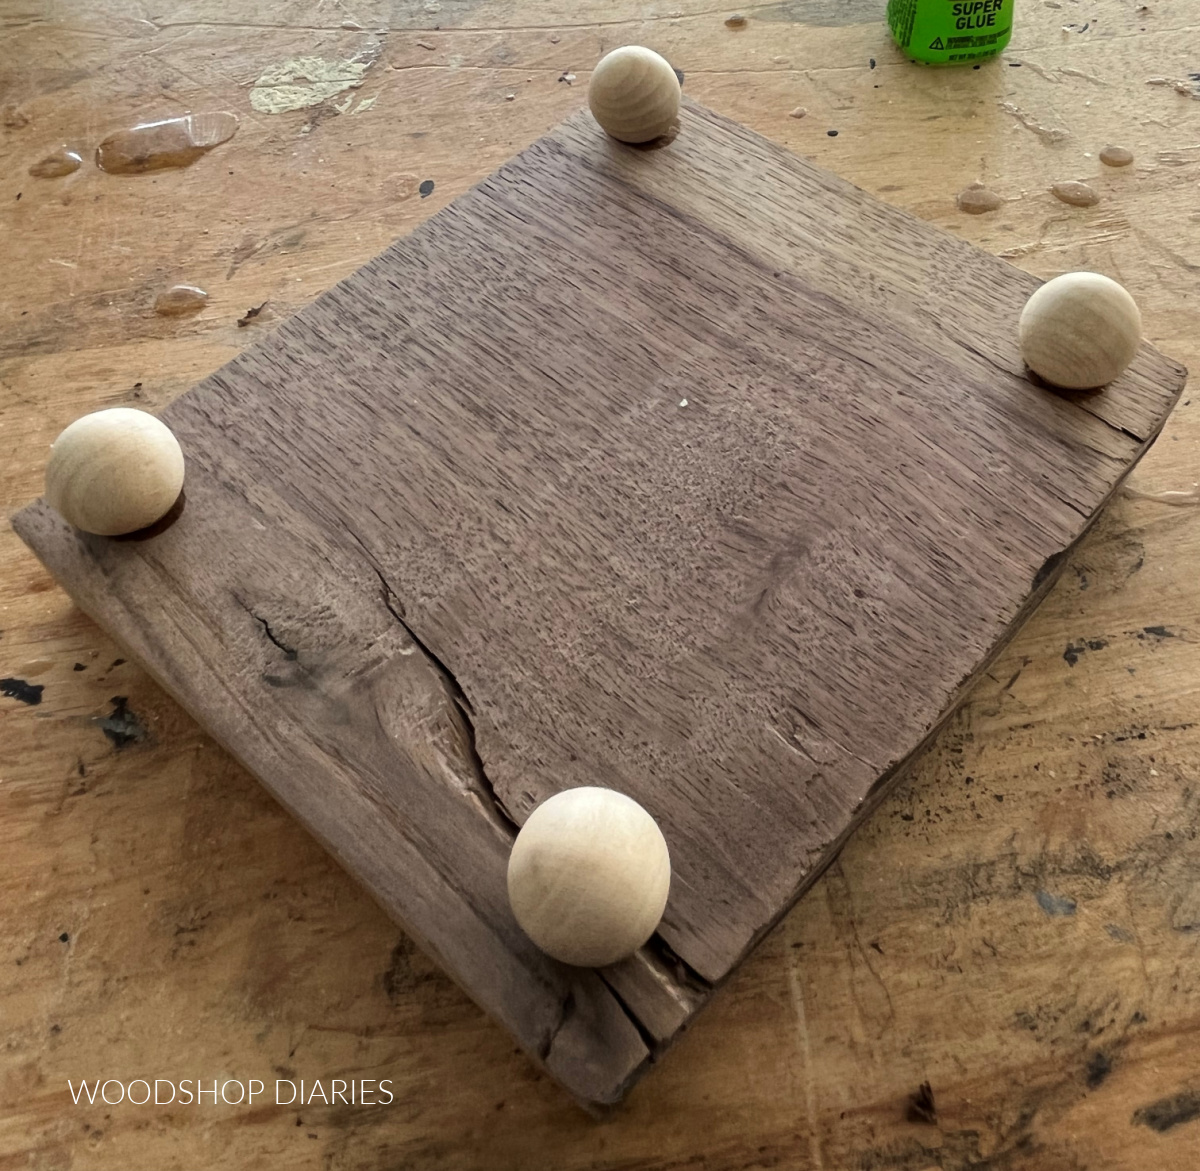 Wooden balls glued on bottom side of wooden tray with feet